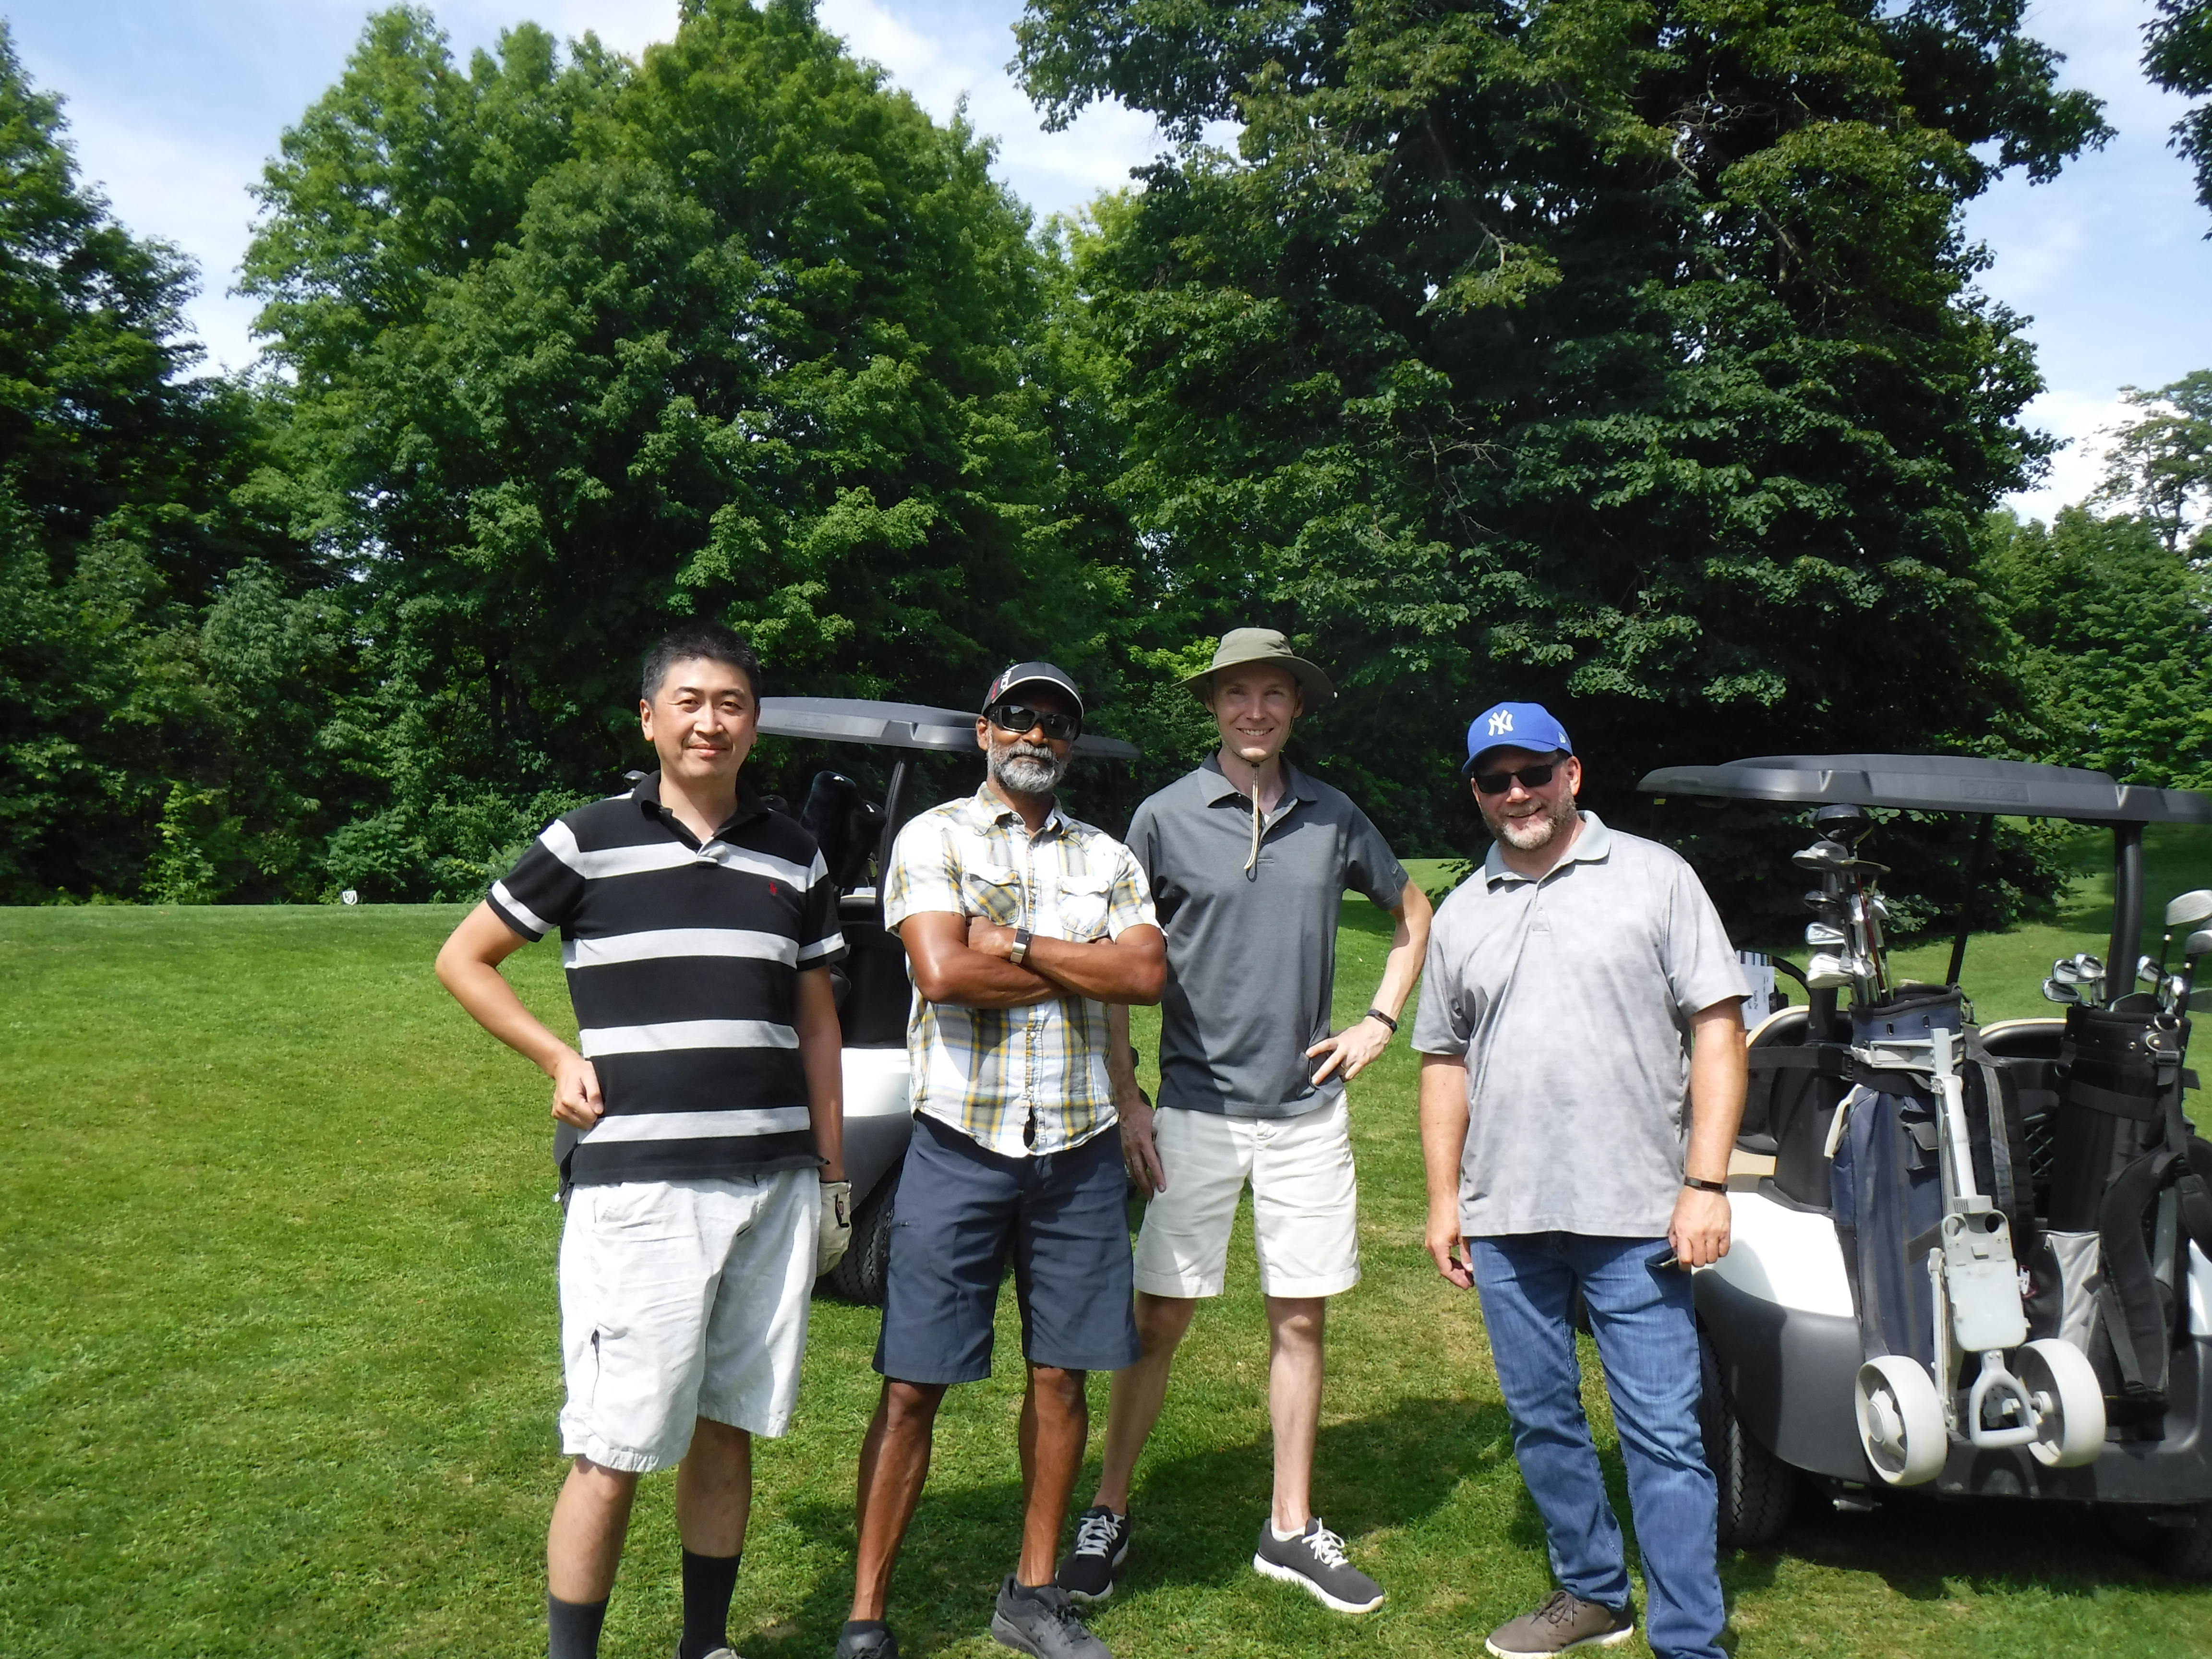 Group of men smiling together on golf course